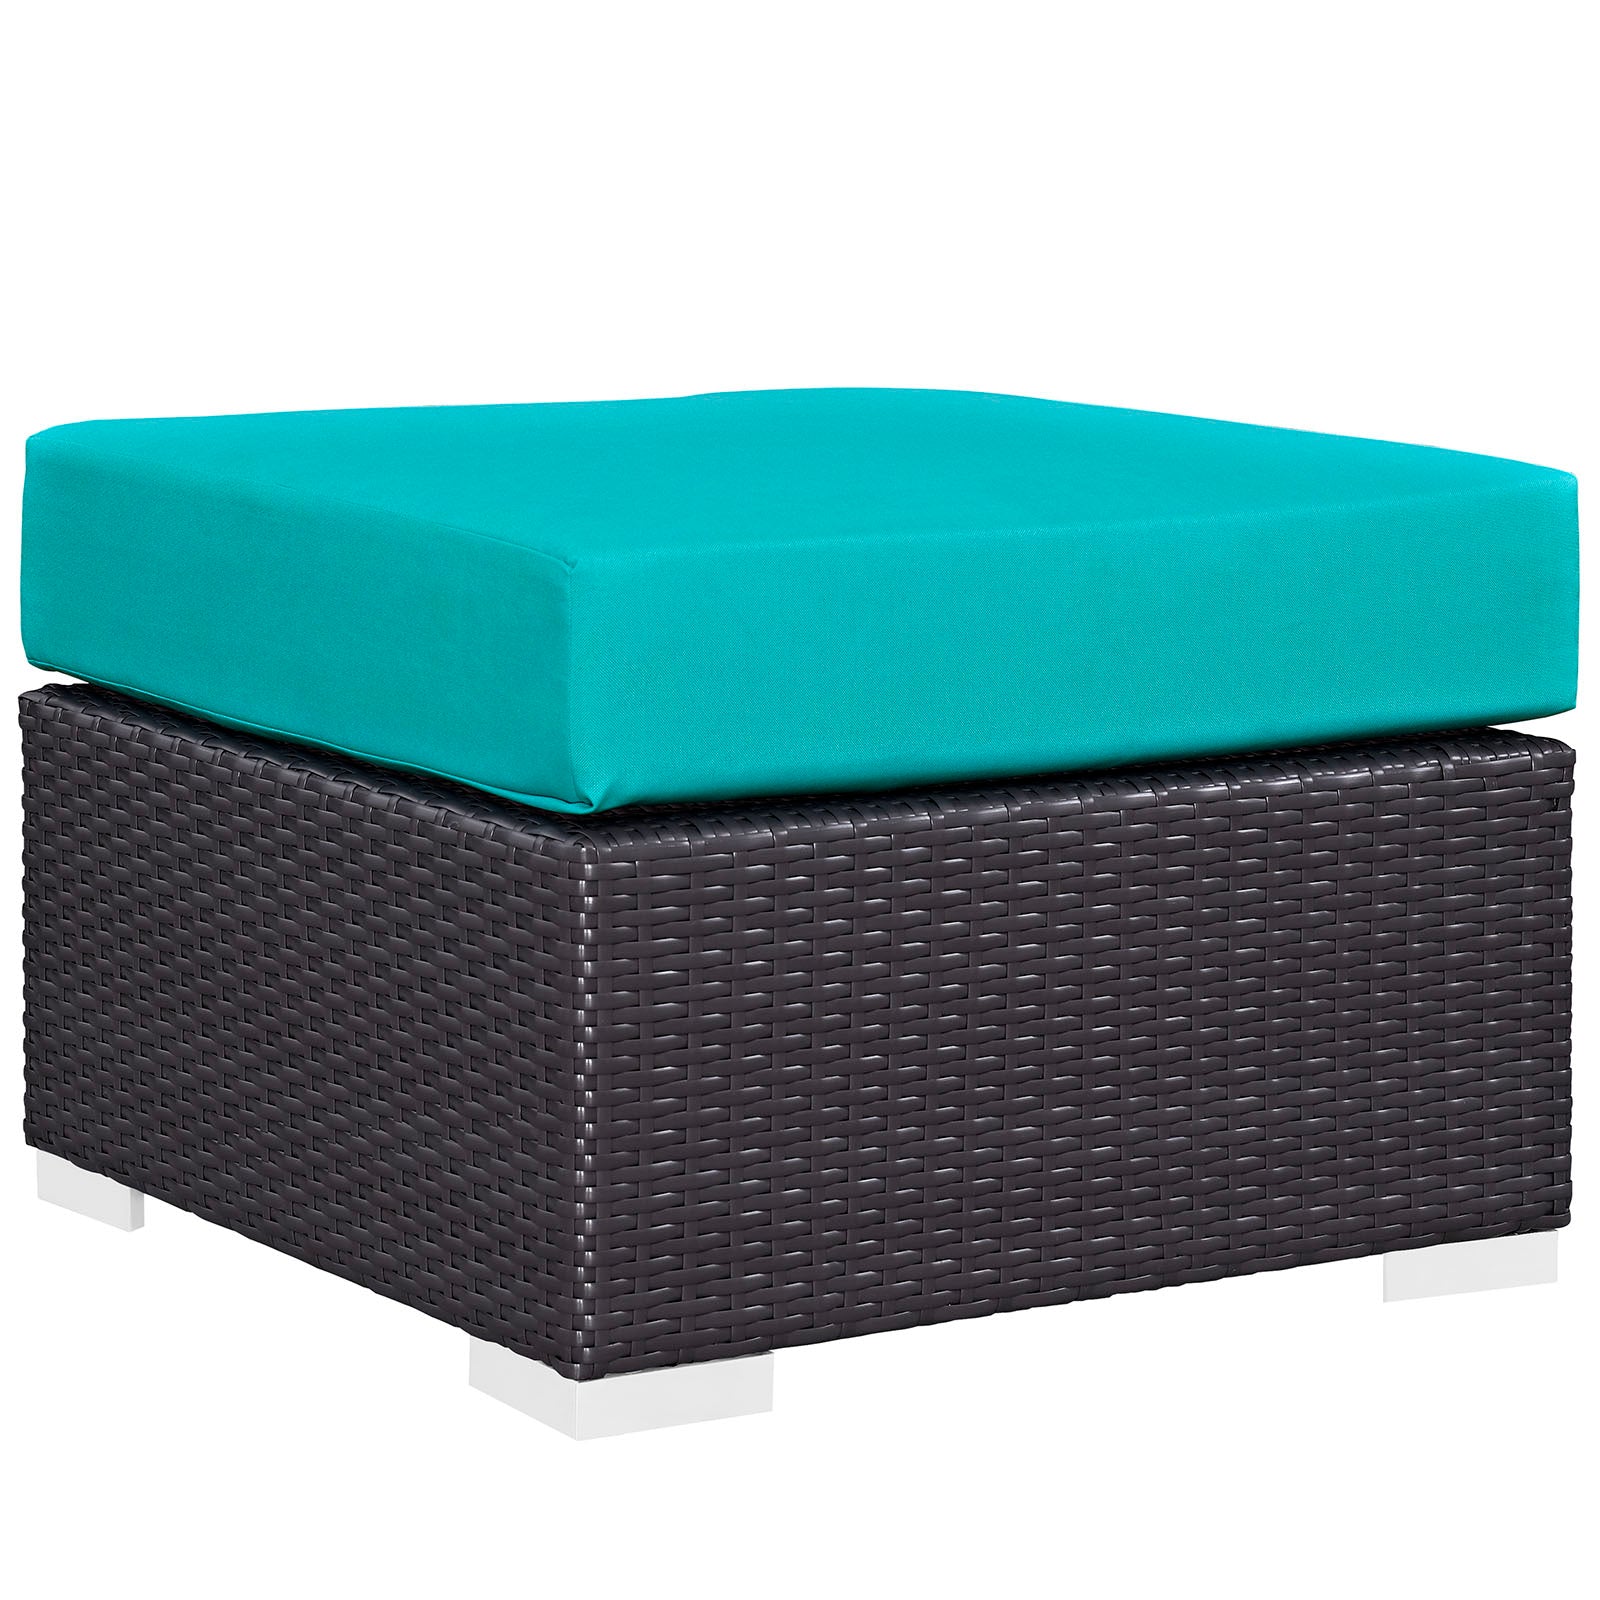 Modway Outdoor Conversation Sets - Convene 5 Piece Outdoor Patio Sectional Set Turquoise